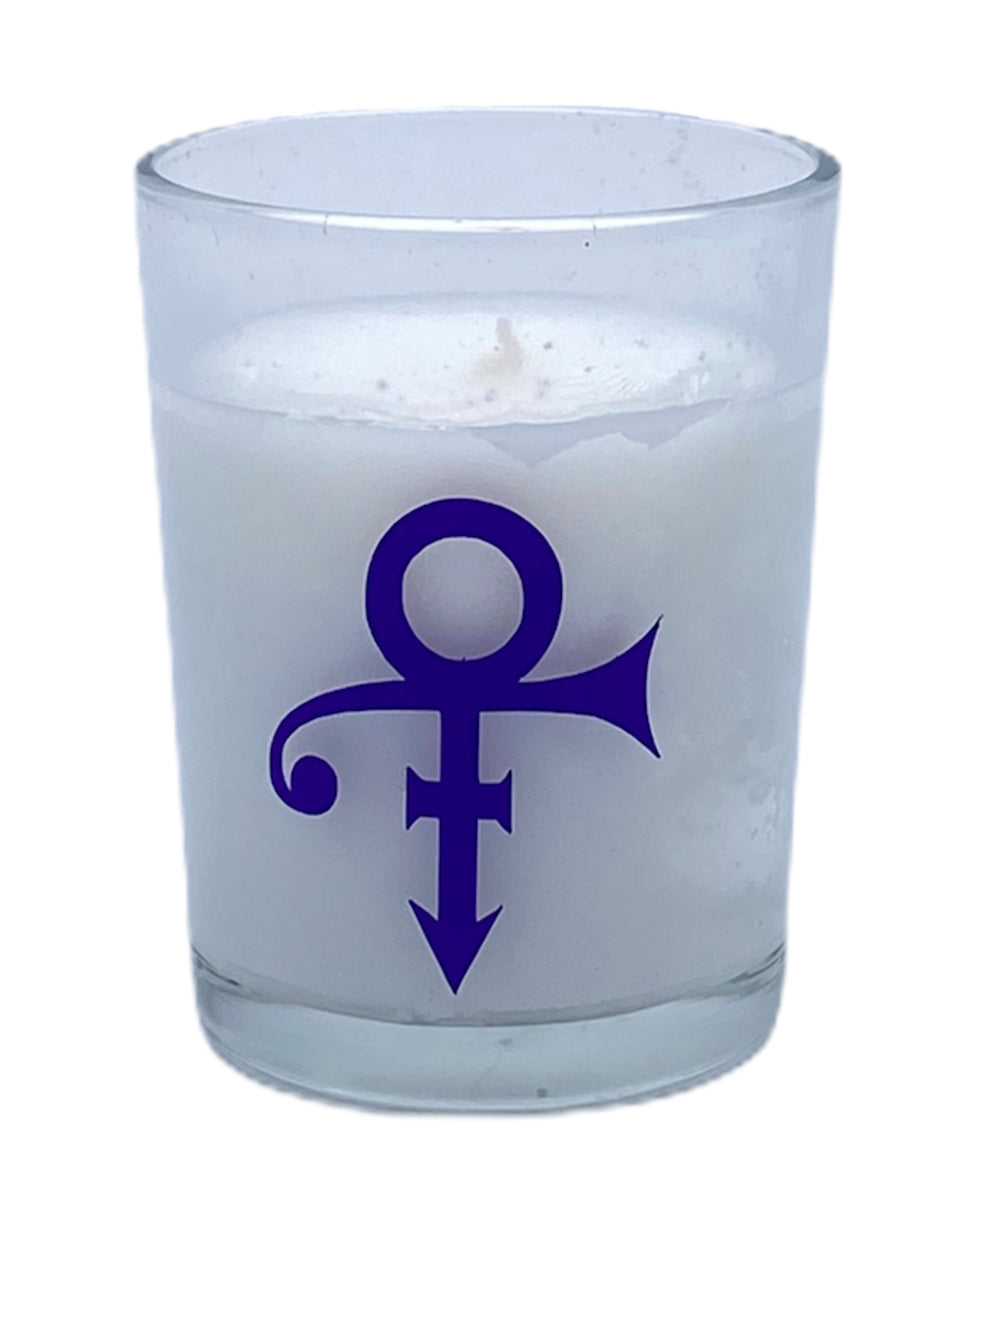 NPG Store Official Merchandise Small Candle In Holder Purple Love Symbol Prince